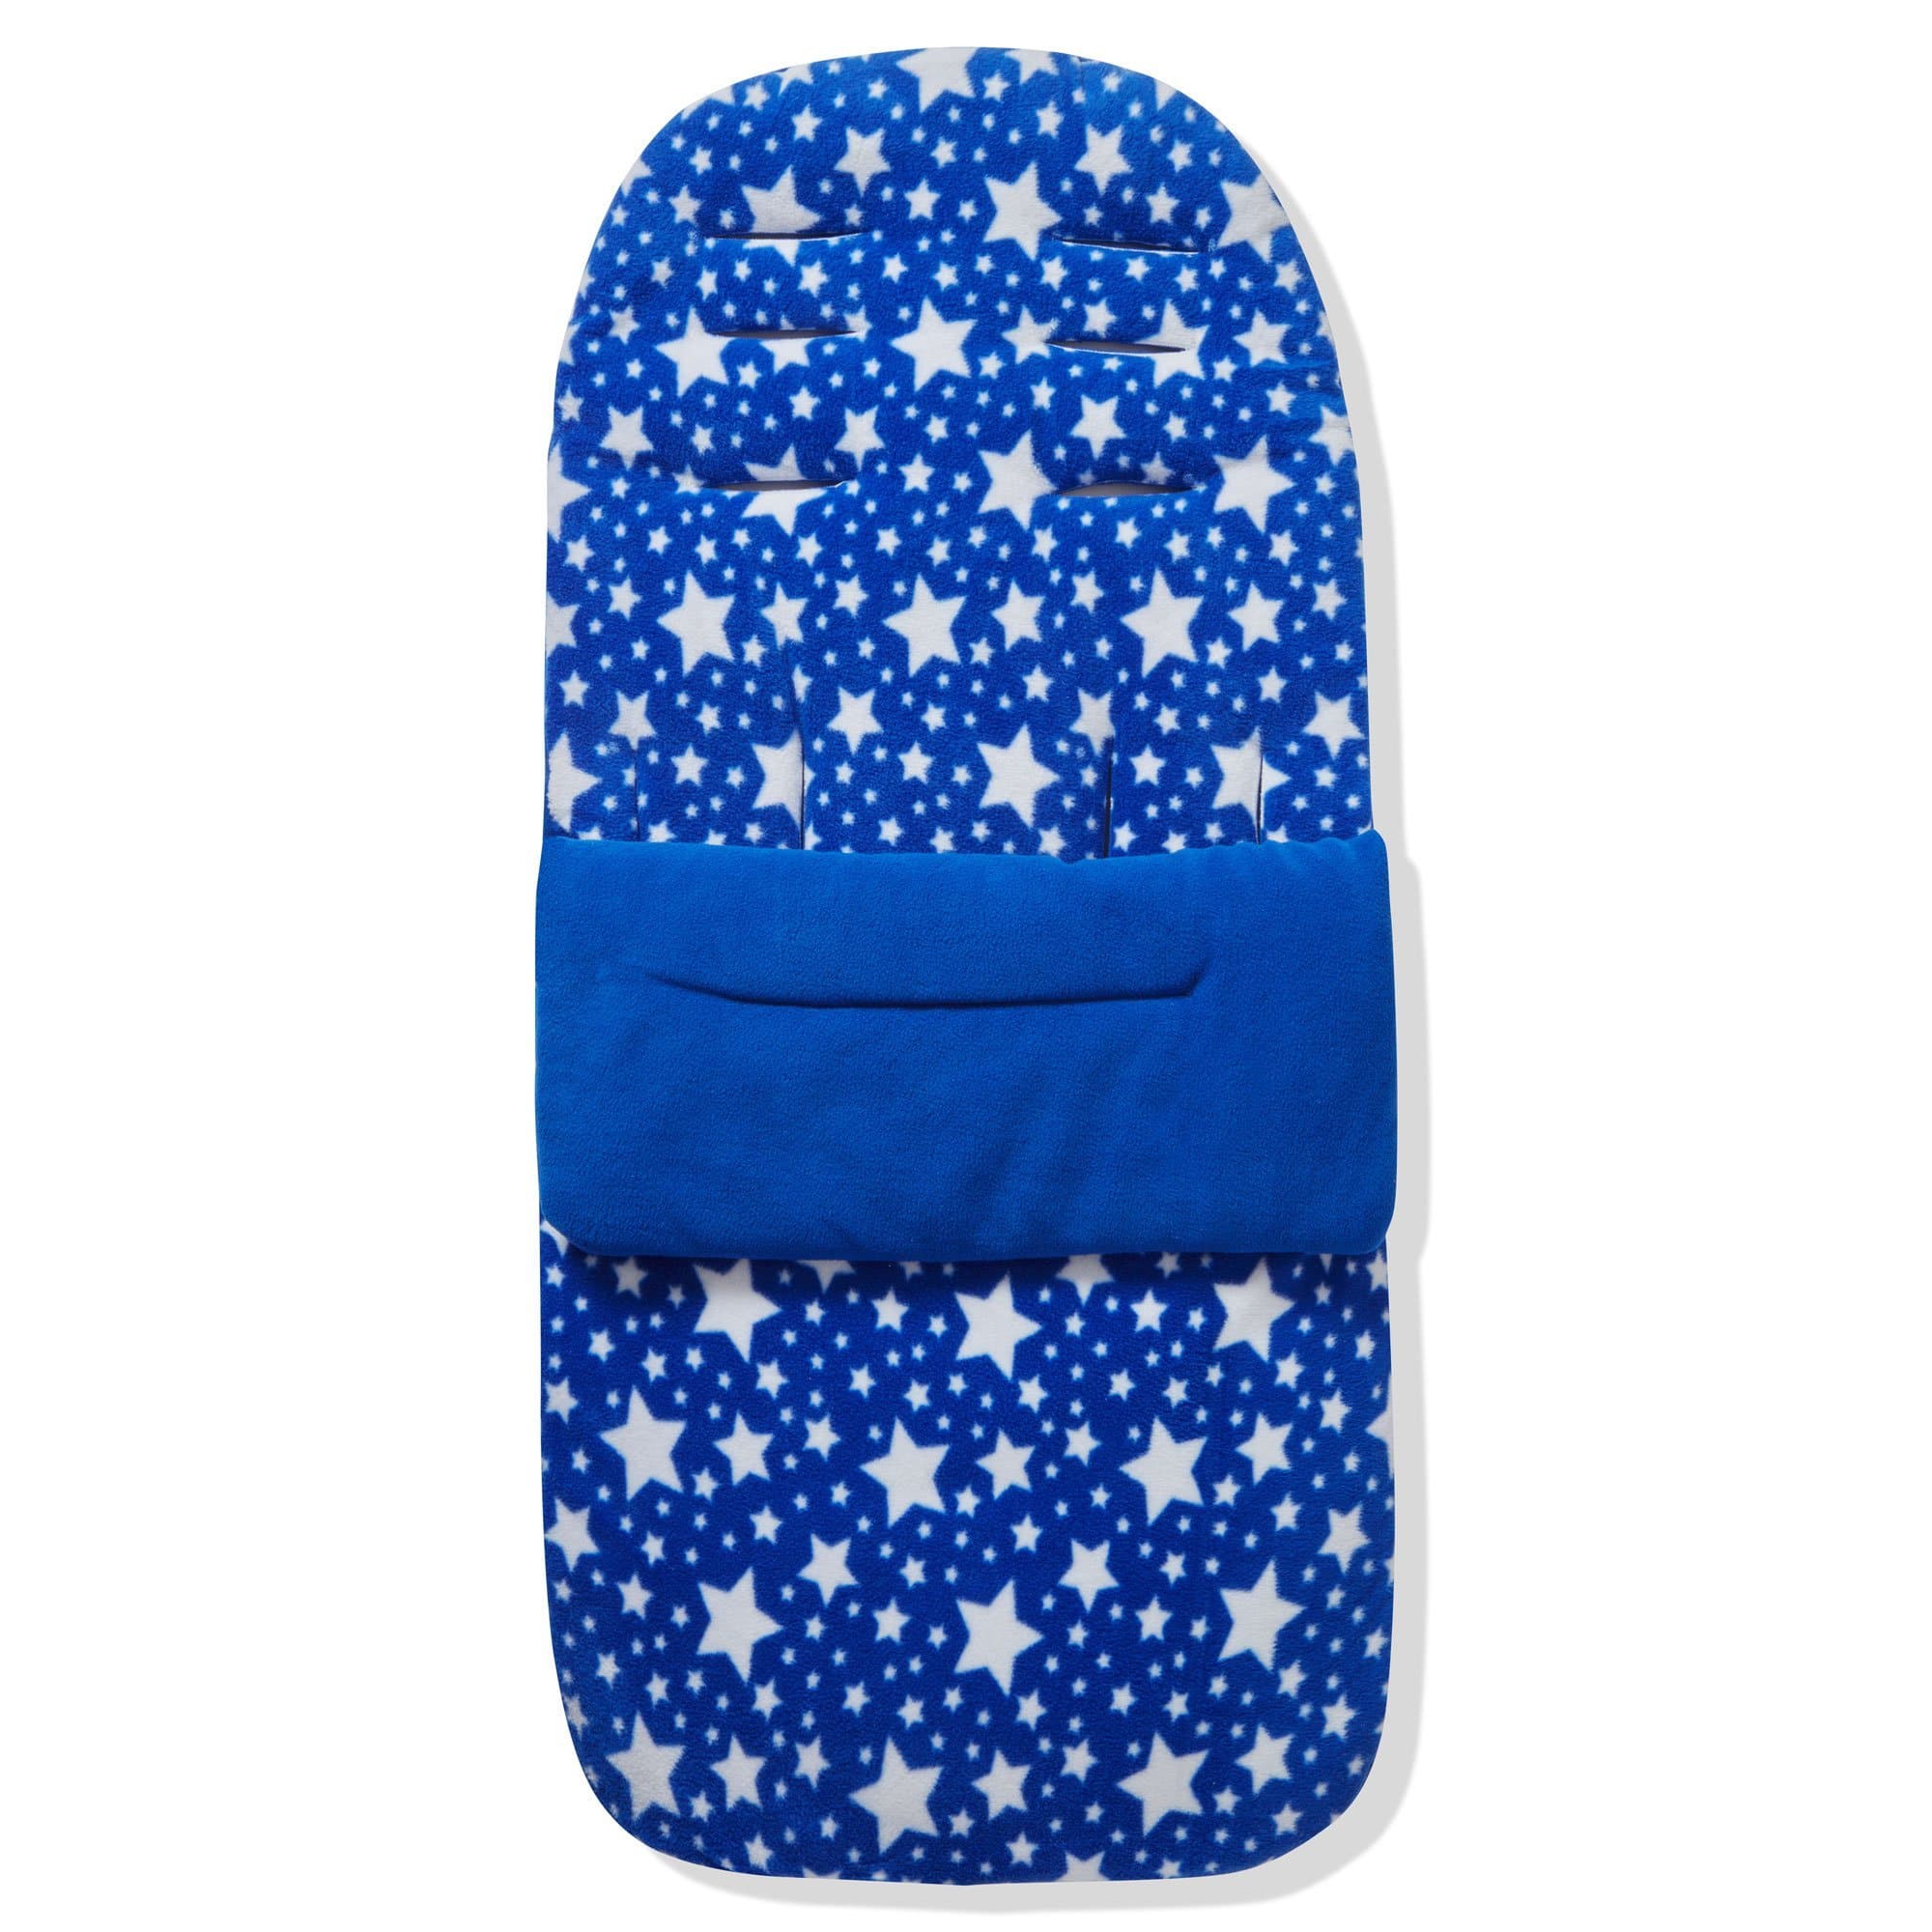 Fleece Footmuff / Cosy Toes Compatible with Kiddicouture - Blue Star / Fits All Models | For Your Little One